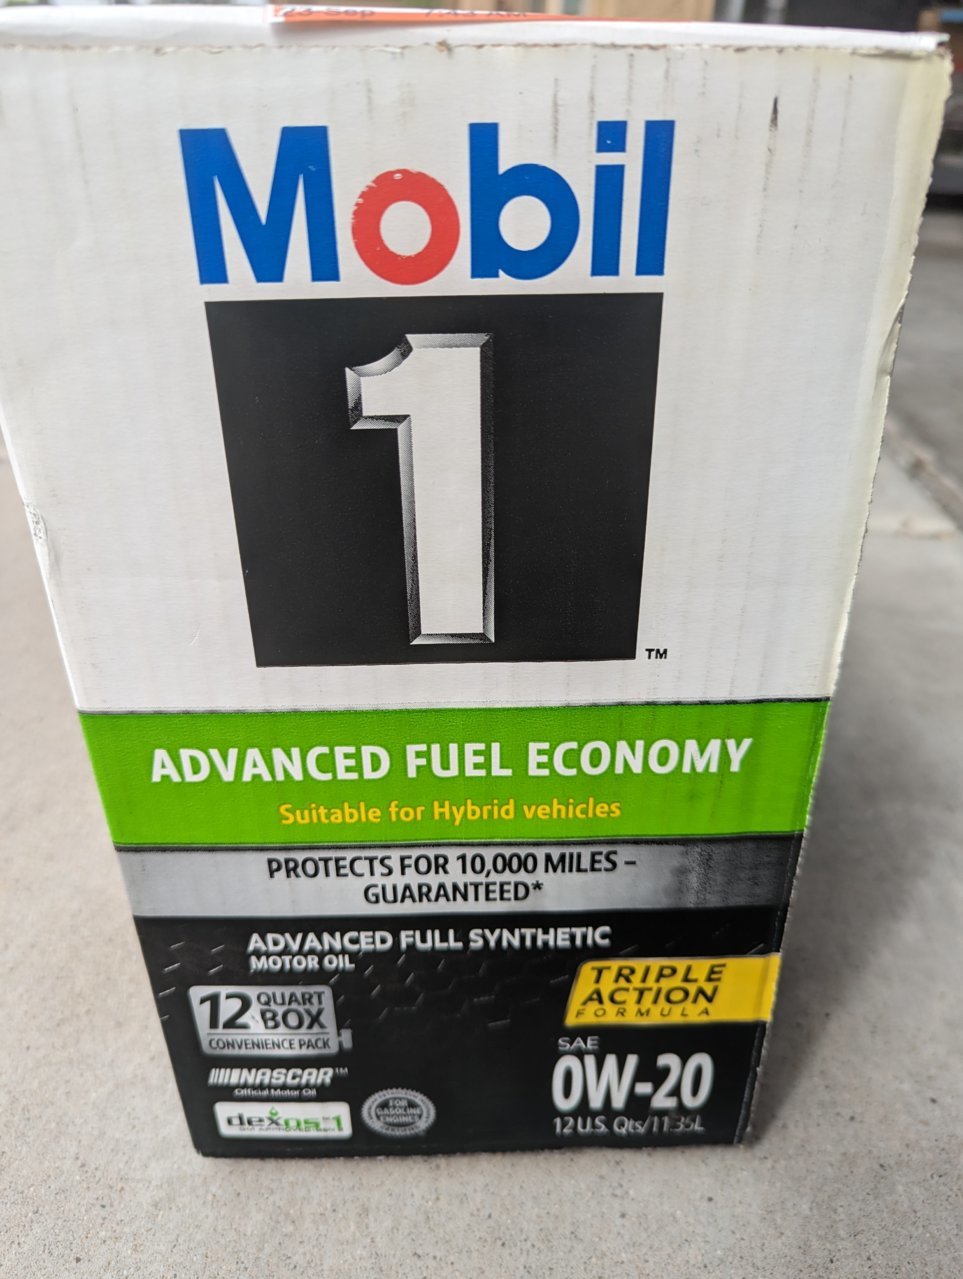 Mobil 1 Advanced Fuel Economy 0W-20 for GM, Honda, Nissan and Toyotas